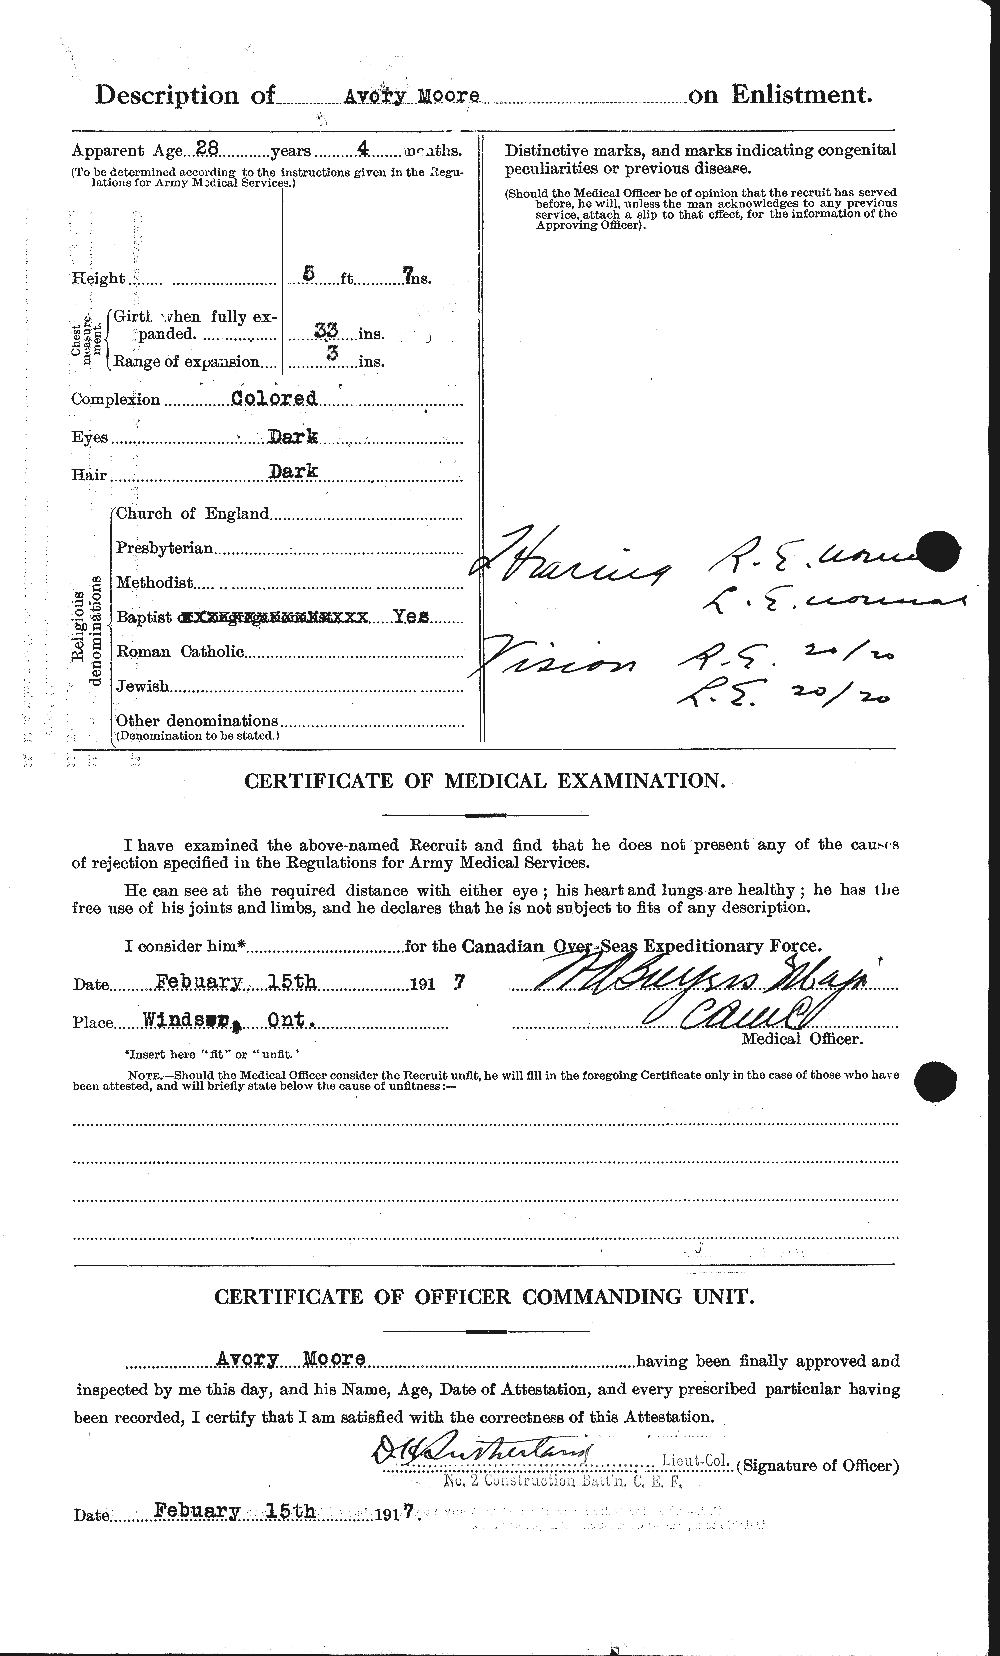 Personnel Records of the First World War - CEF 506459b